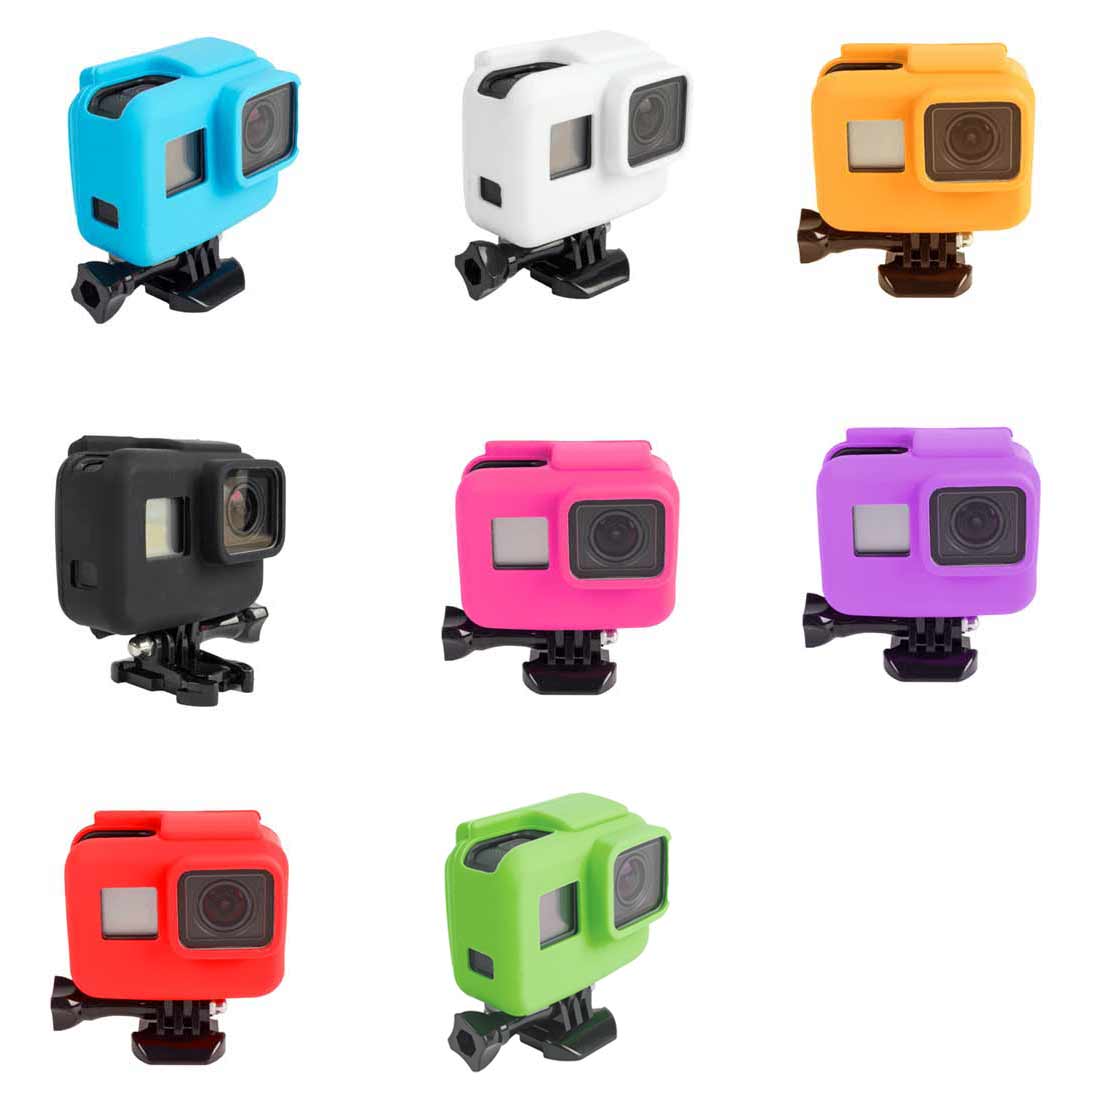 for Gopro Hero 5 Black/4/3+ waterproof case/border Silicone Case Electronic Equipment Other Accessories Waterproof Case